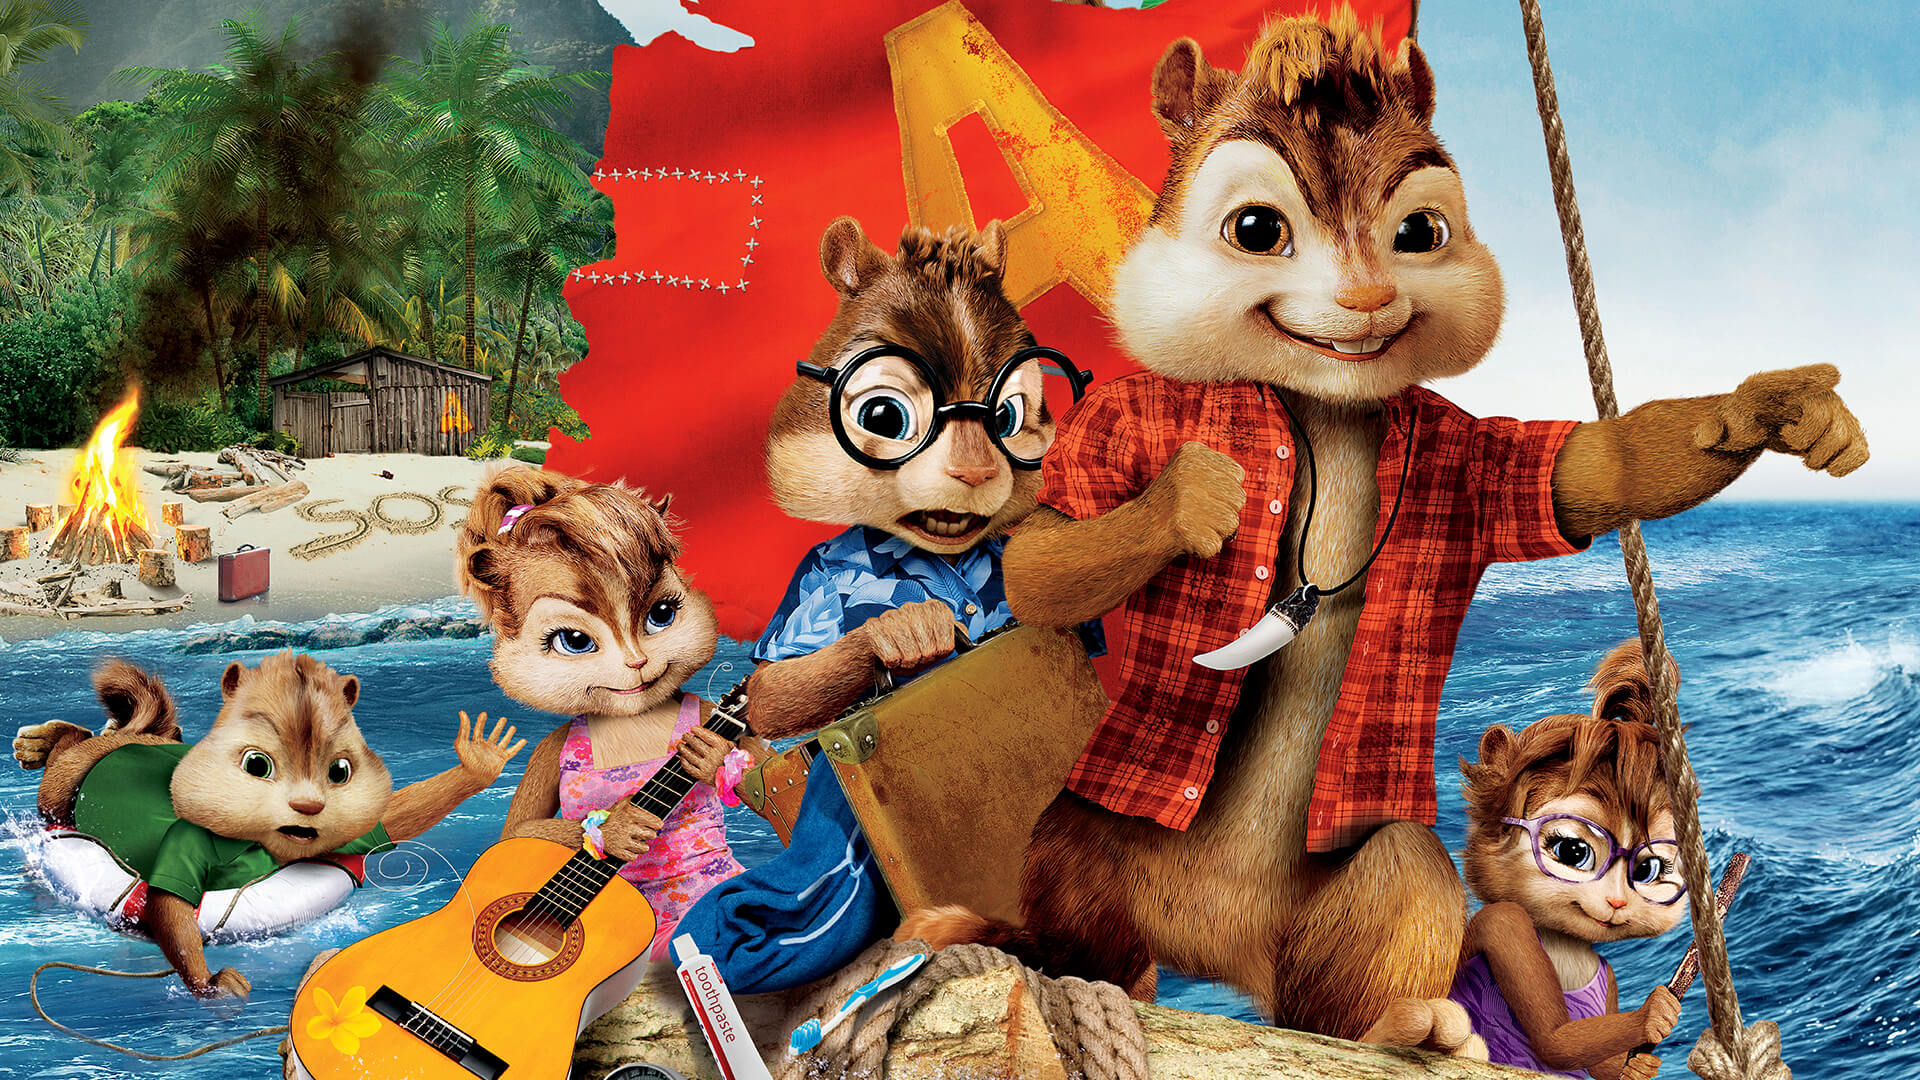 Movie Alvin and the Chipmunks: Chipwrecked HD Wallpaper | Background Image